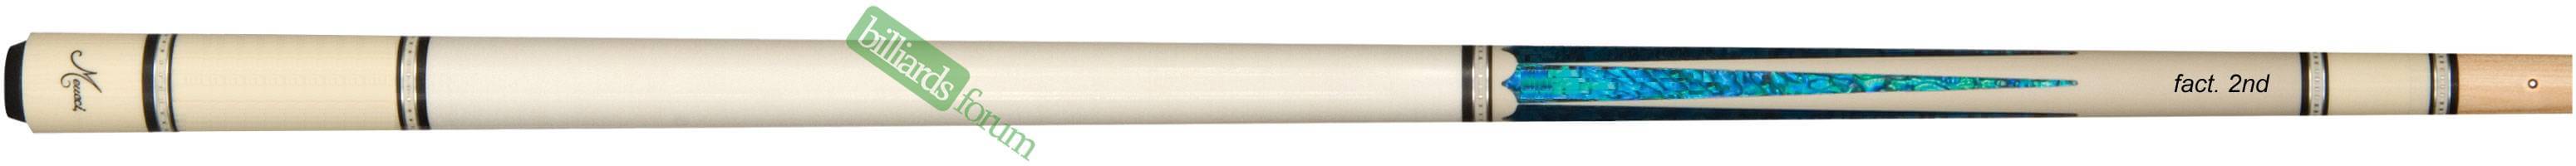 Meucci 21st Century Series #3 Fact. 2nd Pool Cue Model 21-3